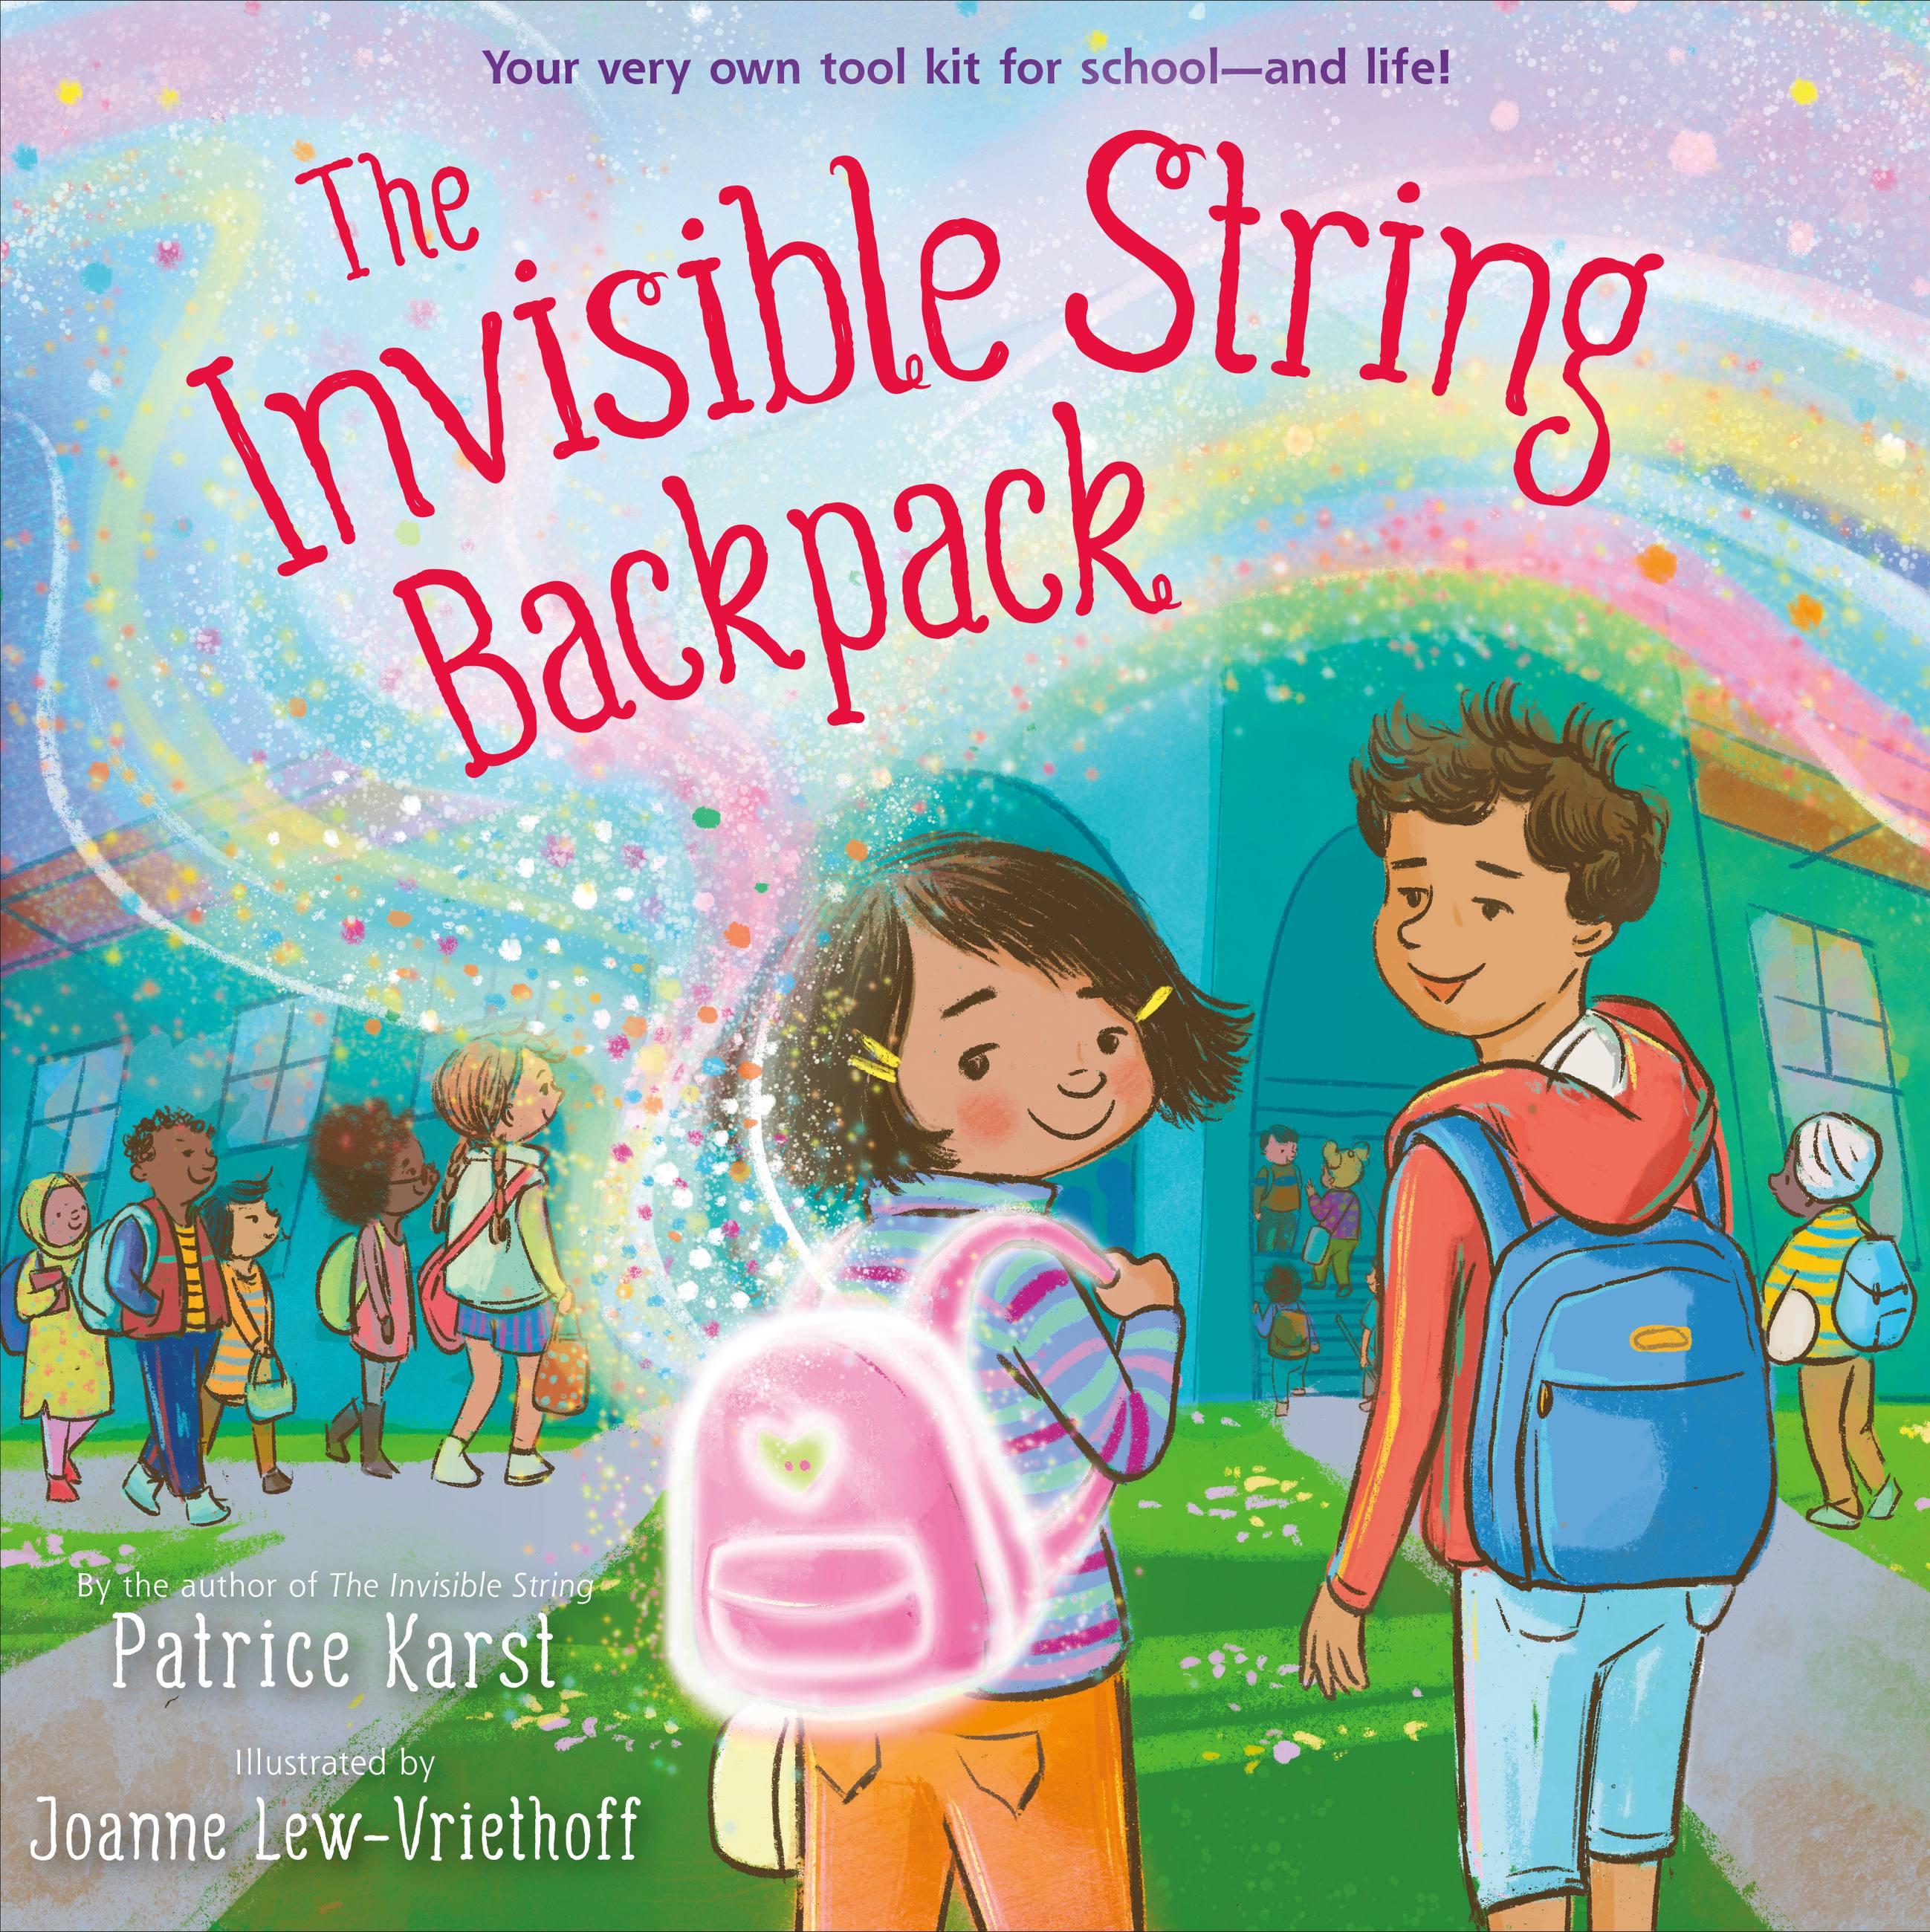 The Invisible String Backpack by Patrice Karst